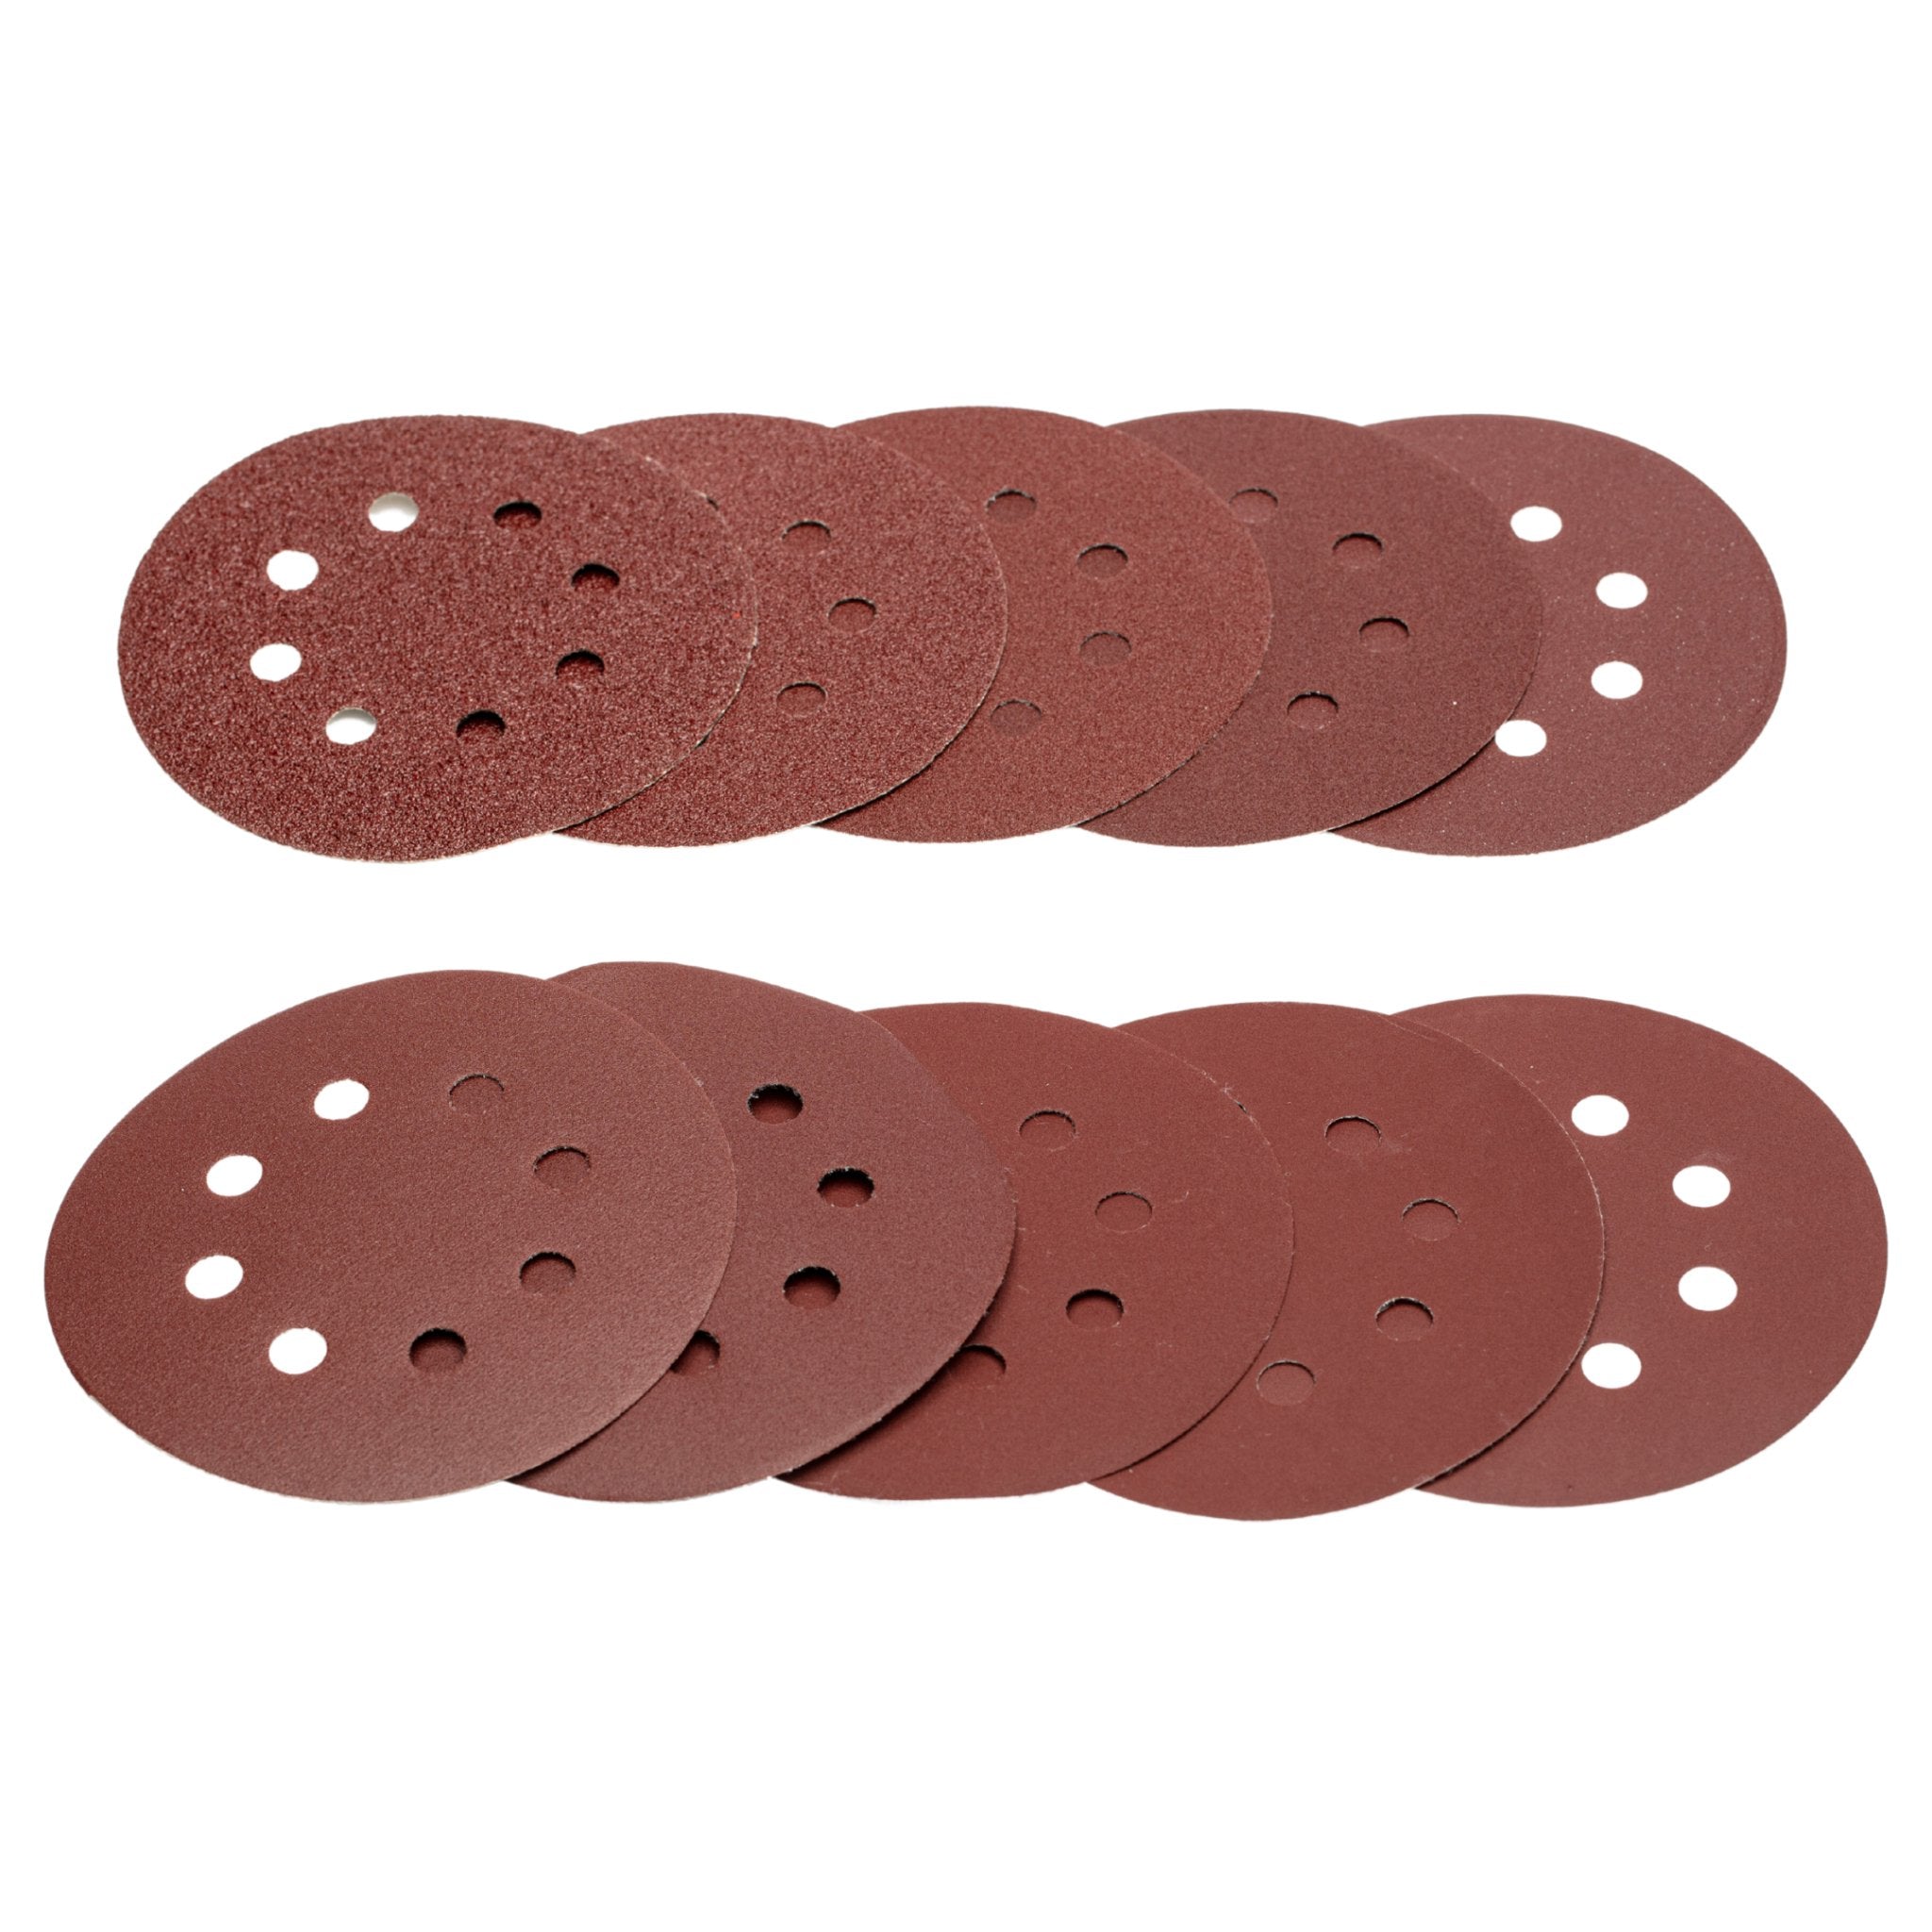 Starbond 5-inch 8 Hole Hook-and-Loop Sanding Discs - Value Pack, 100 PCS | Adhesive | Starbond